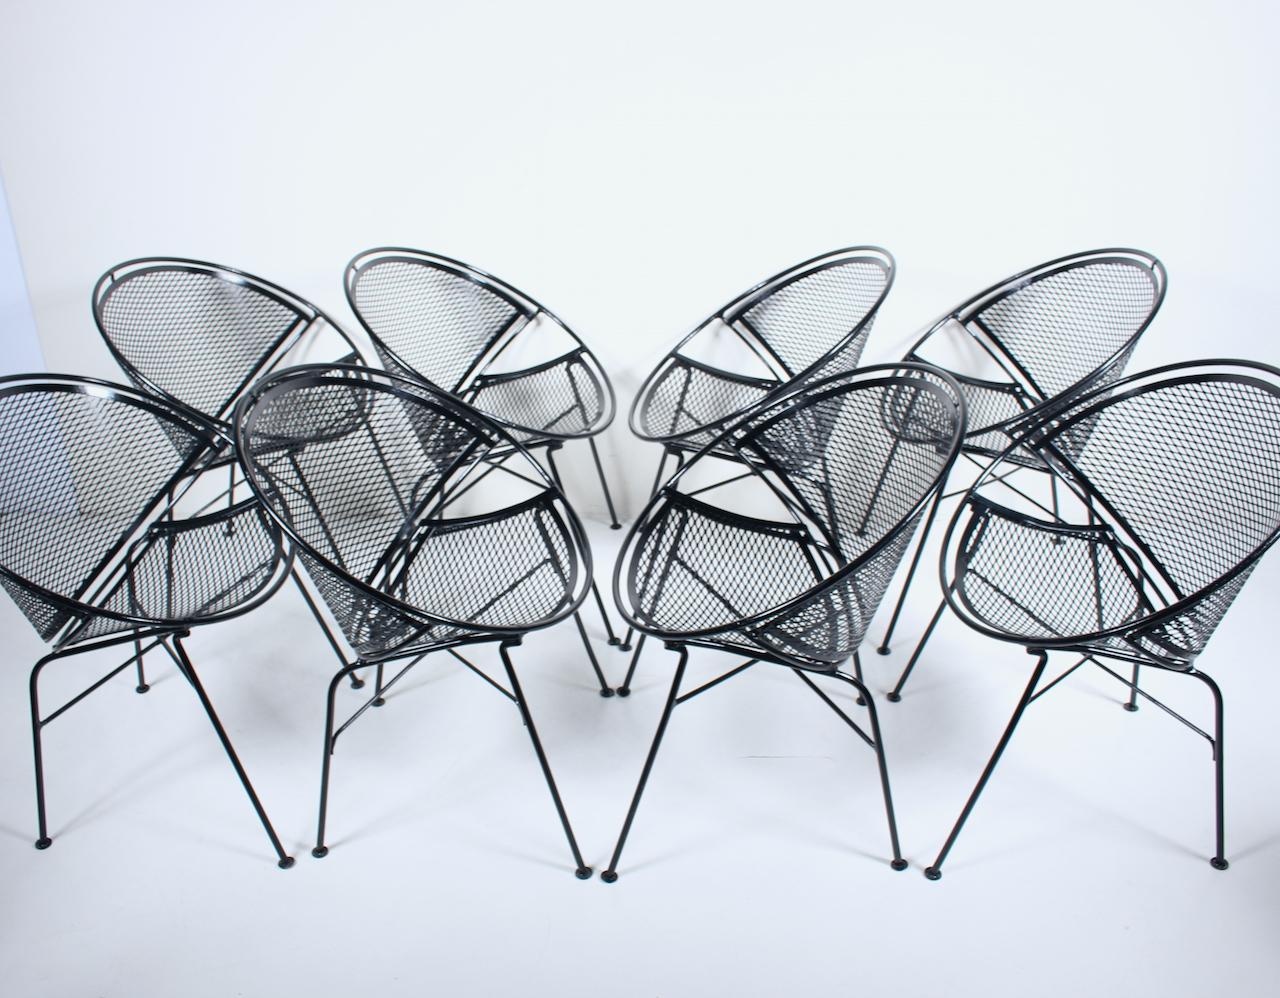 Original Maurizio Tempestini for Salterini set of eight radar dining armchairs. Featuring sculpted sturdy hoop frameworks in black enameled wrought iron, curved ergonomic full backs, with comfortable wire mesh backs and seats detailed with glide